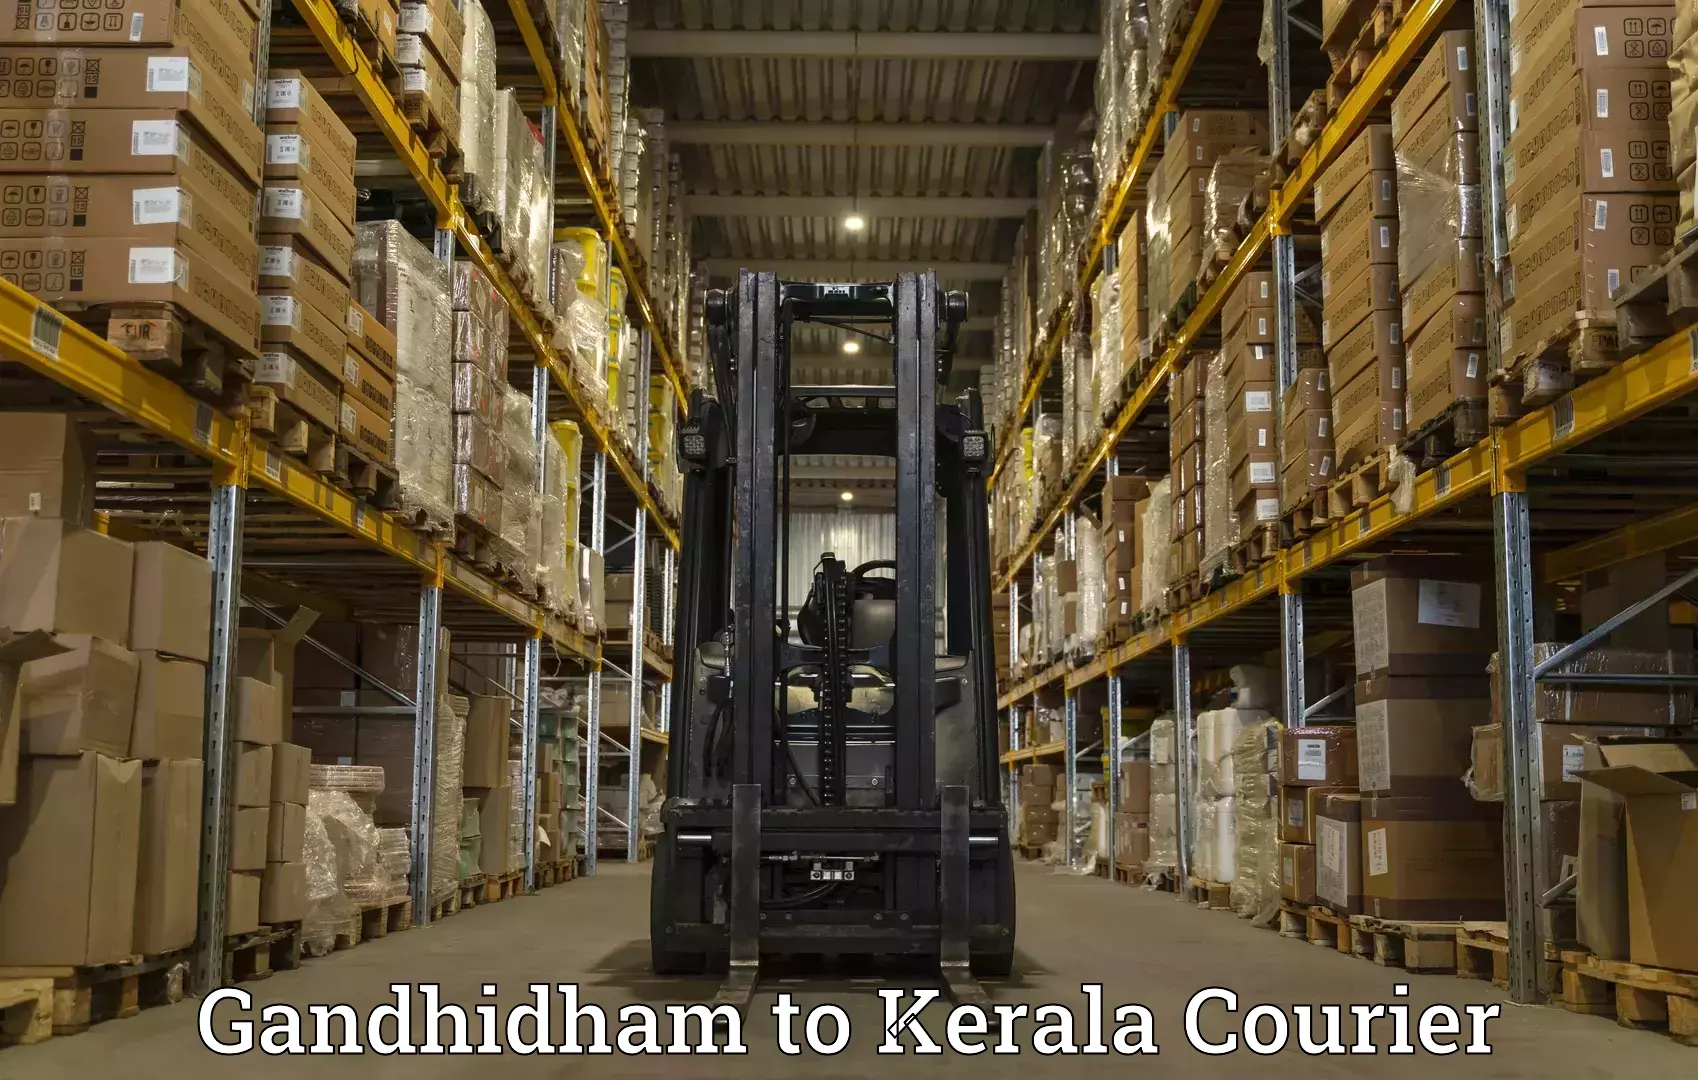 Multi-national courier services Gandhidham to Kerala